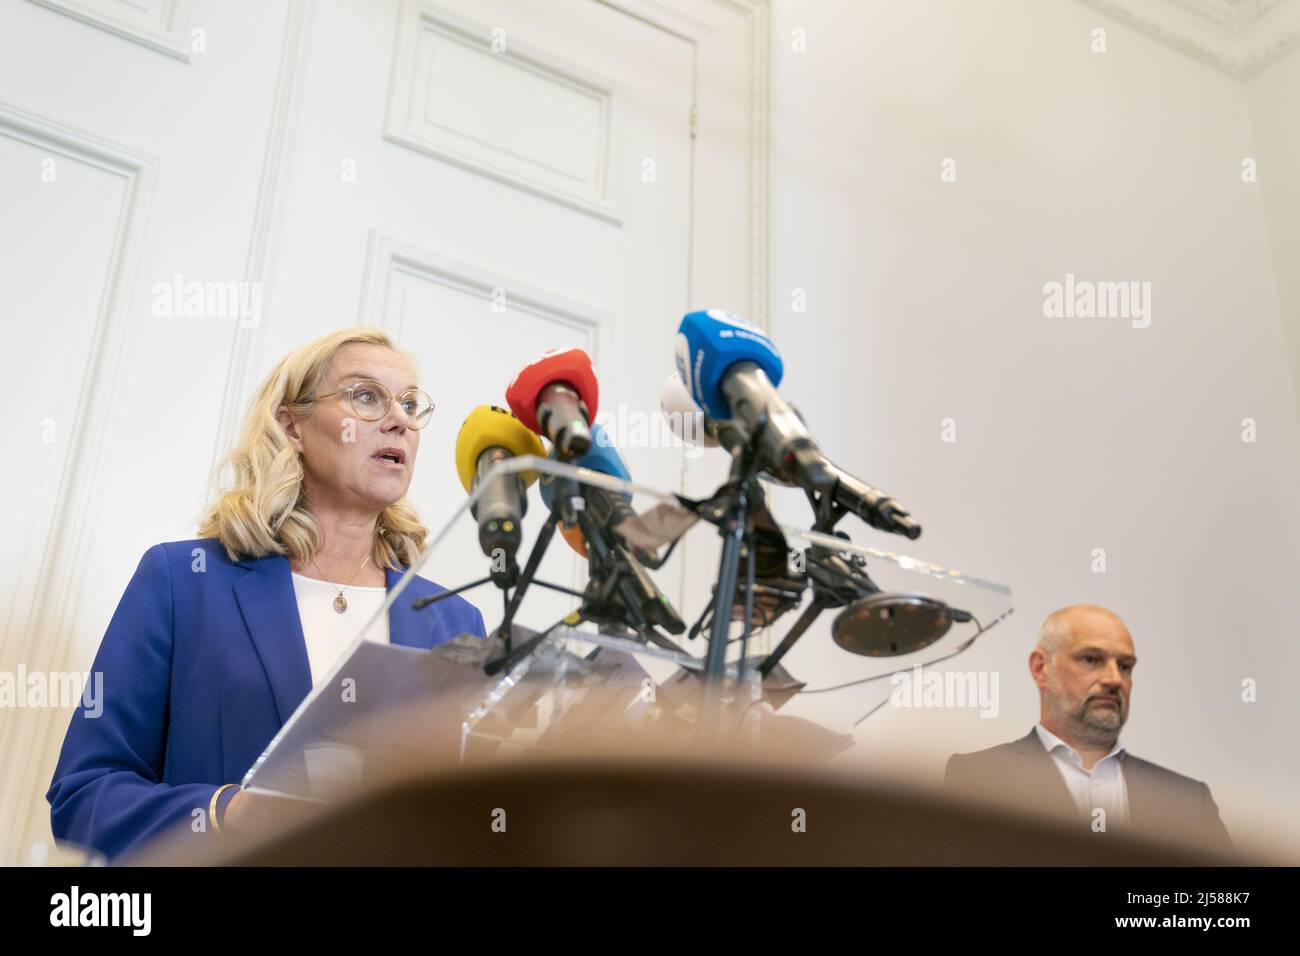 2022-04-21 13:59:31 THE HAGUE - Sigrid Kaag, Minister of Finance, will explain the conclusions about the affair concerning transgressive behavior within the party. ANP BART SIZE netherlands out - belgium out Stock Photo